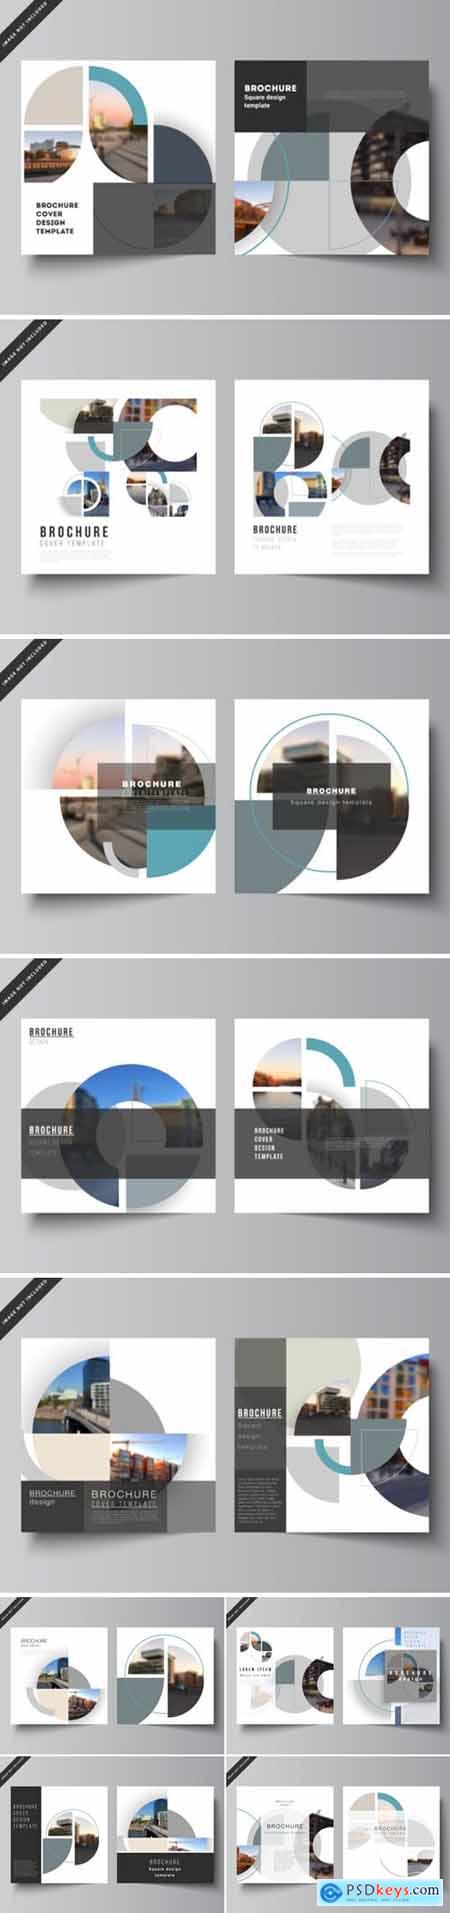 Two Square Covers Design Templates